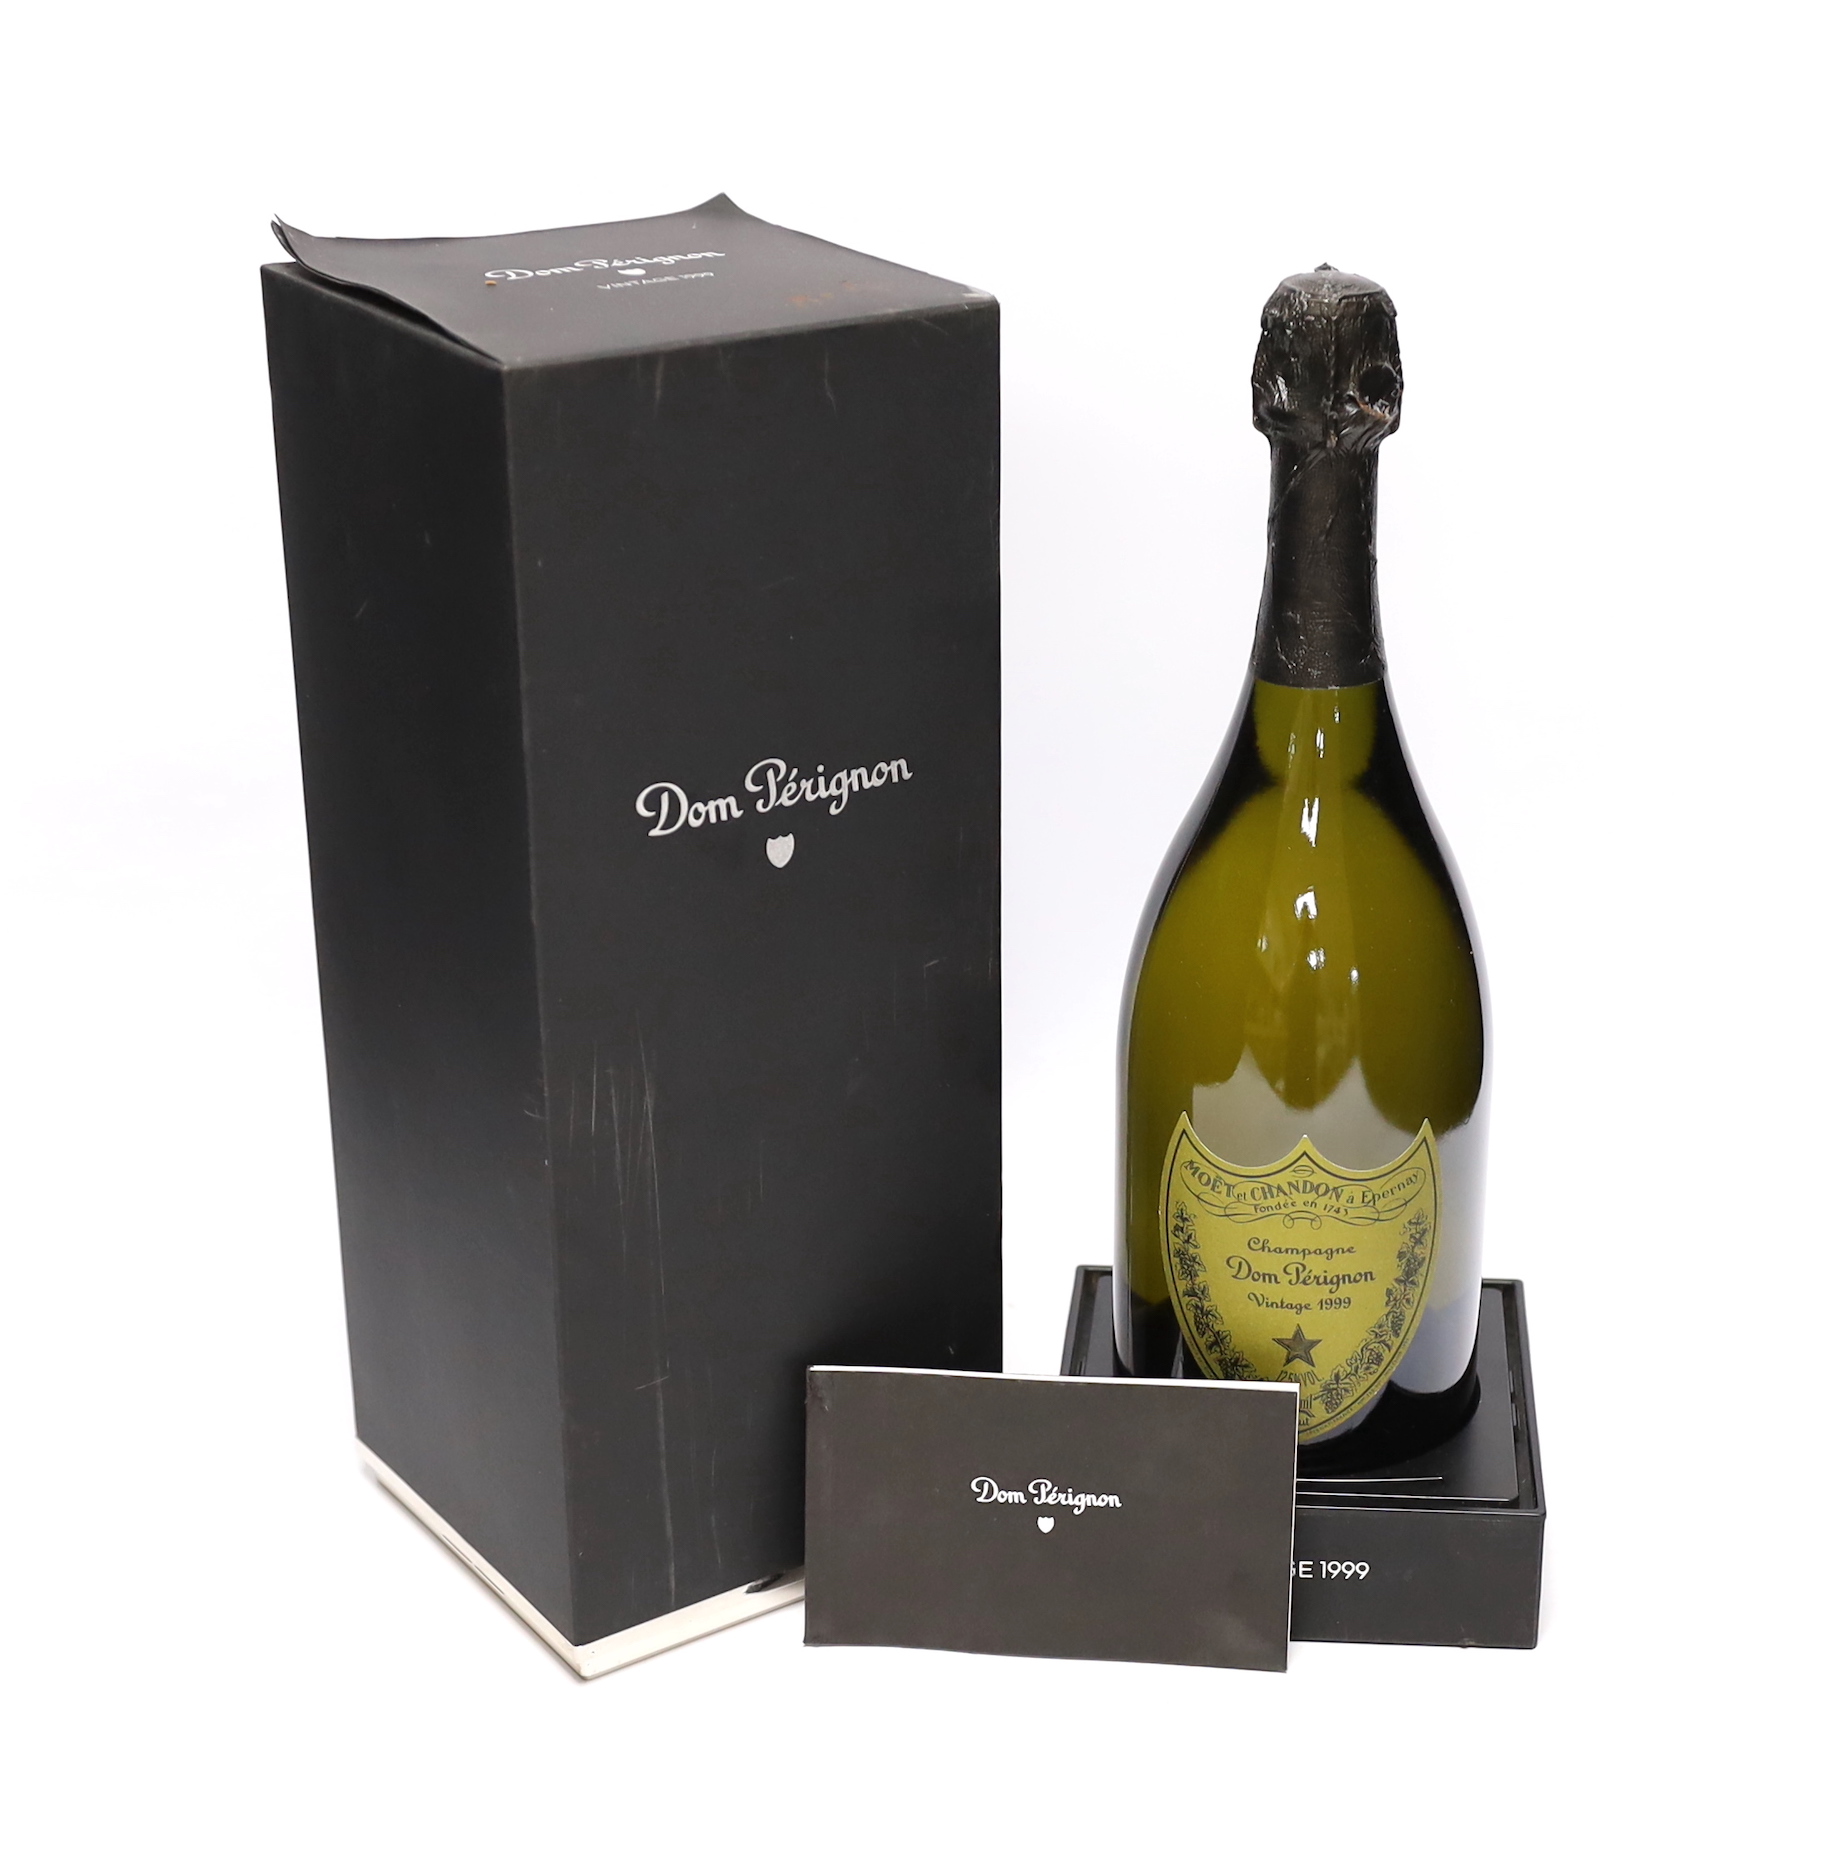 A bottle of Dom Perignon 1999 with booklet and box